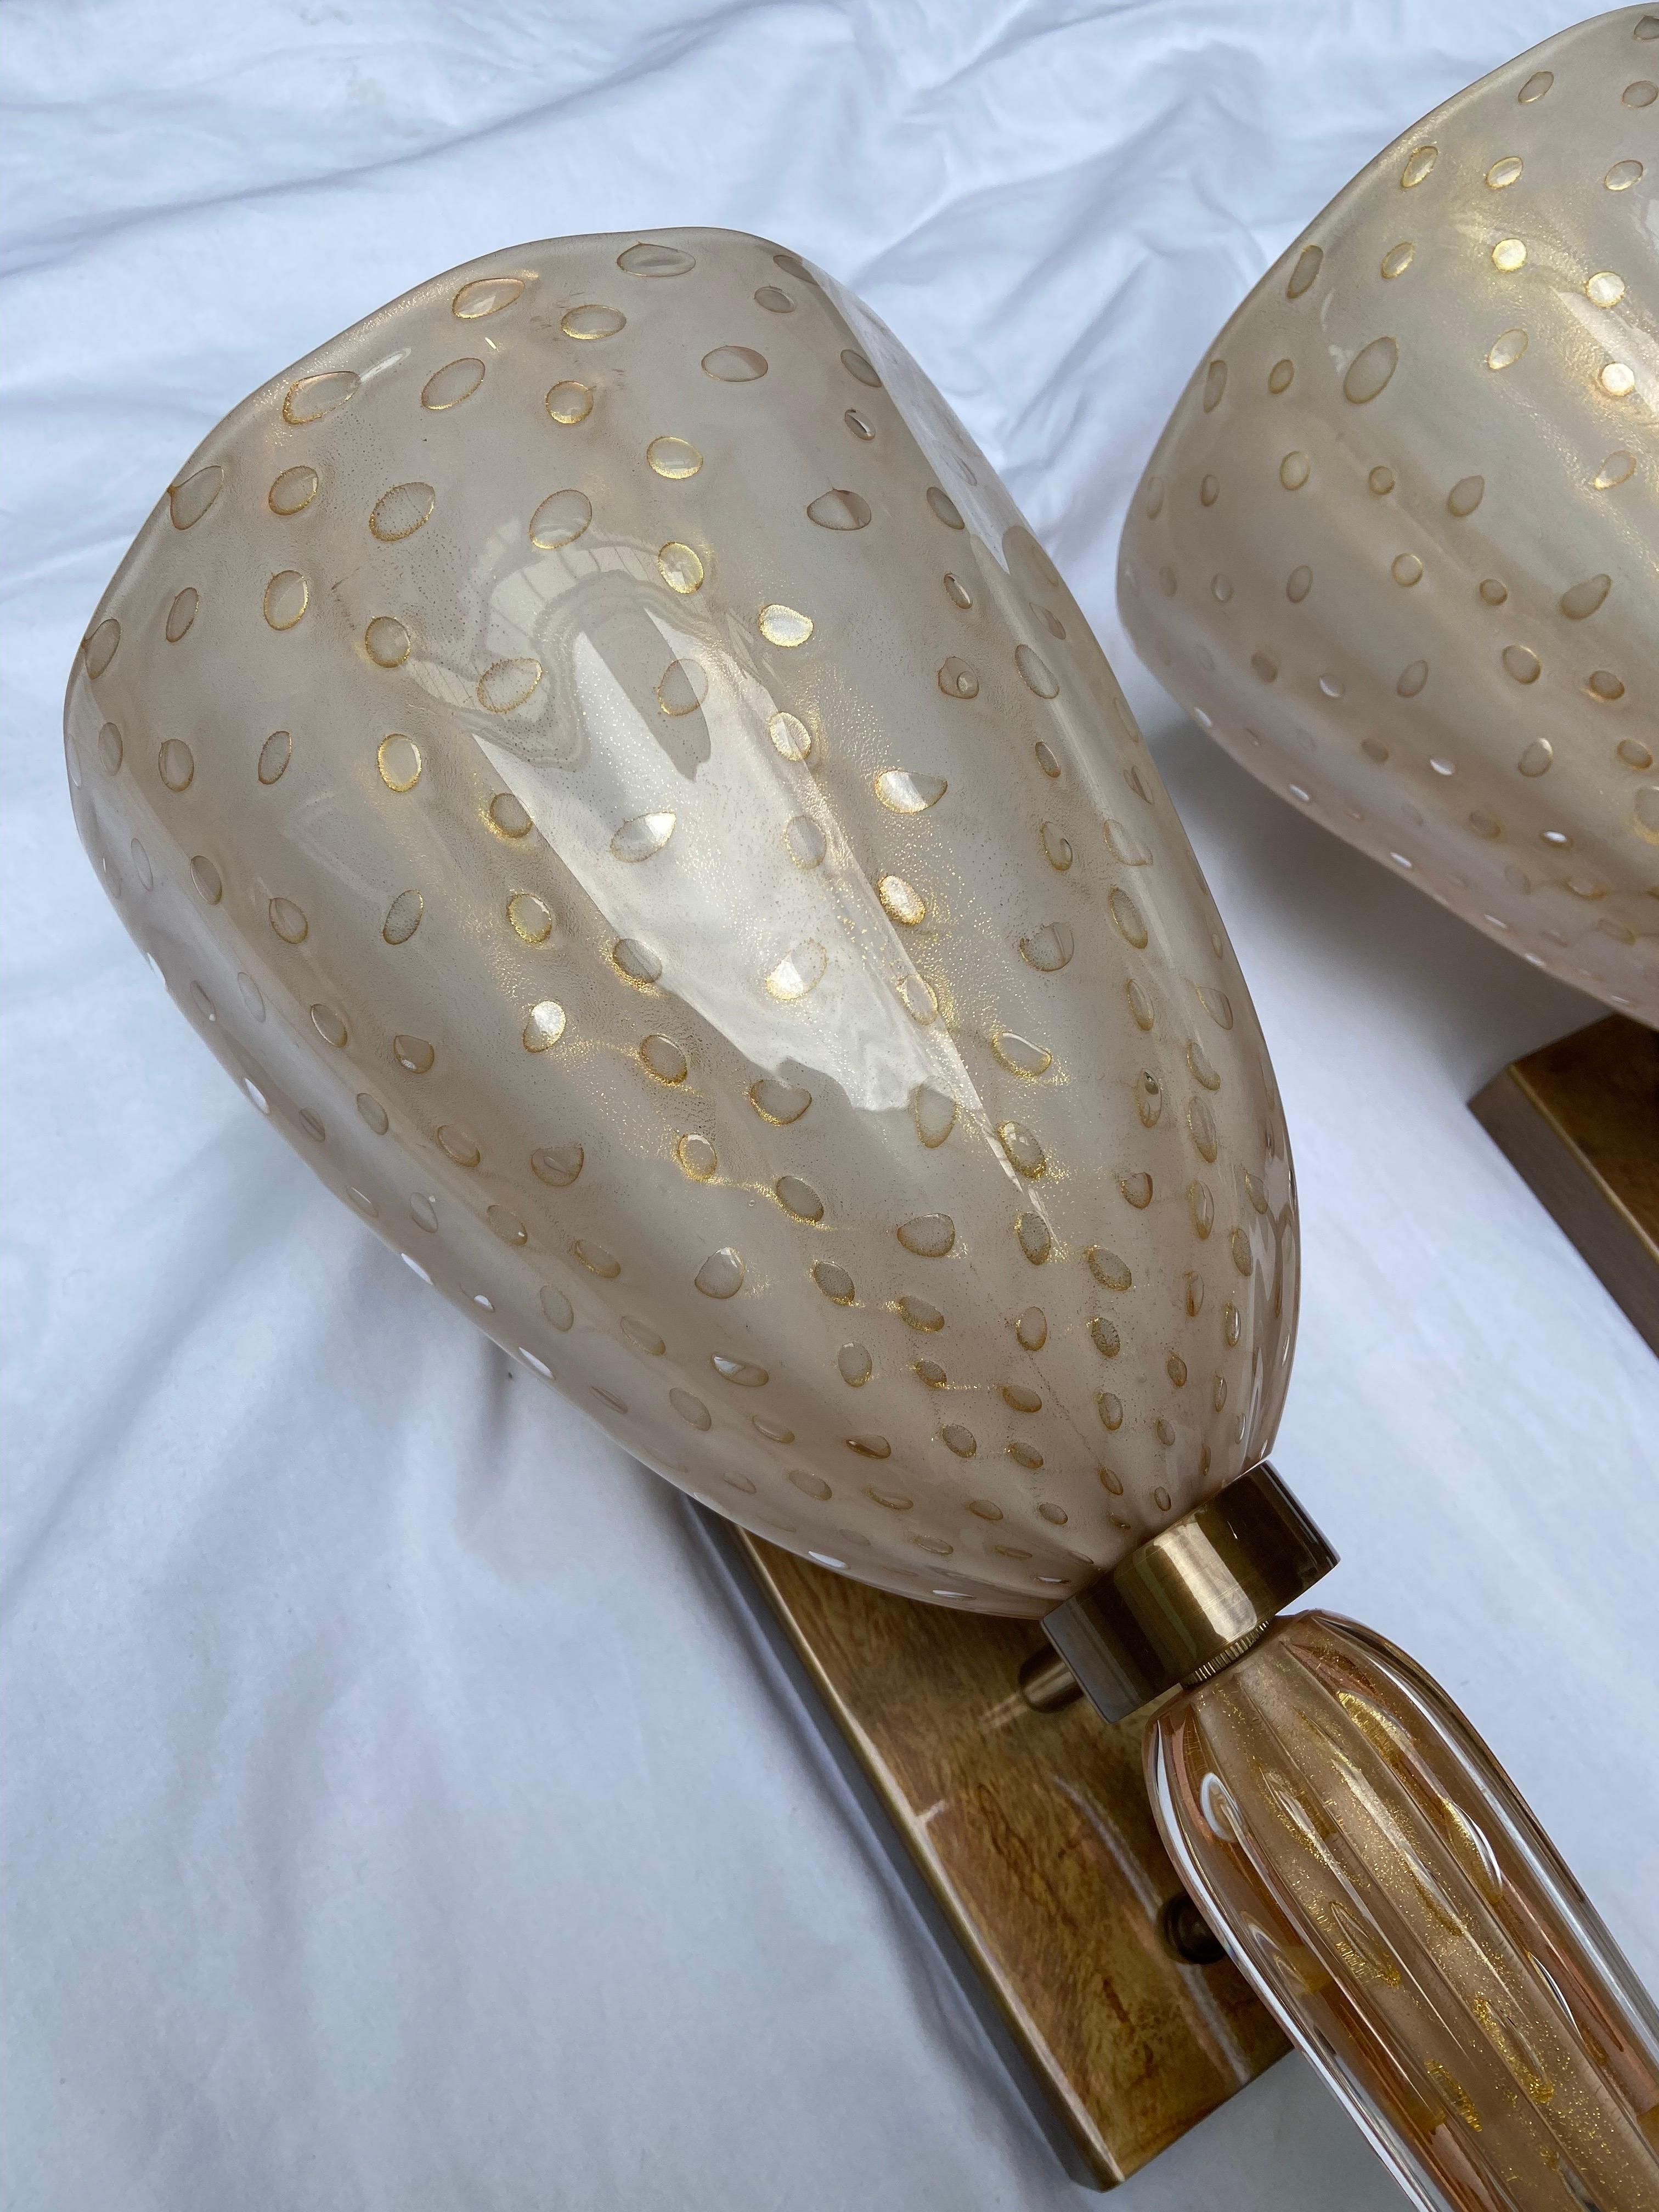 Pair of torch sconces
Murano glass,
circa 1990
Measures: H 60 x D 20 cm 

2 pairs available.